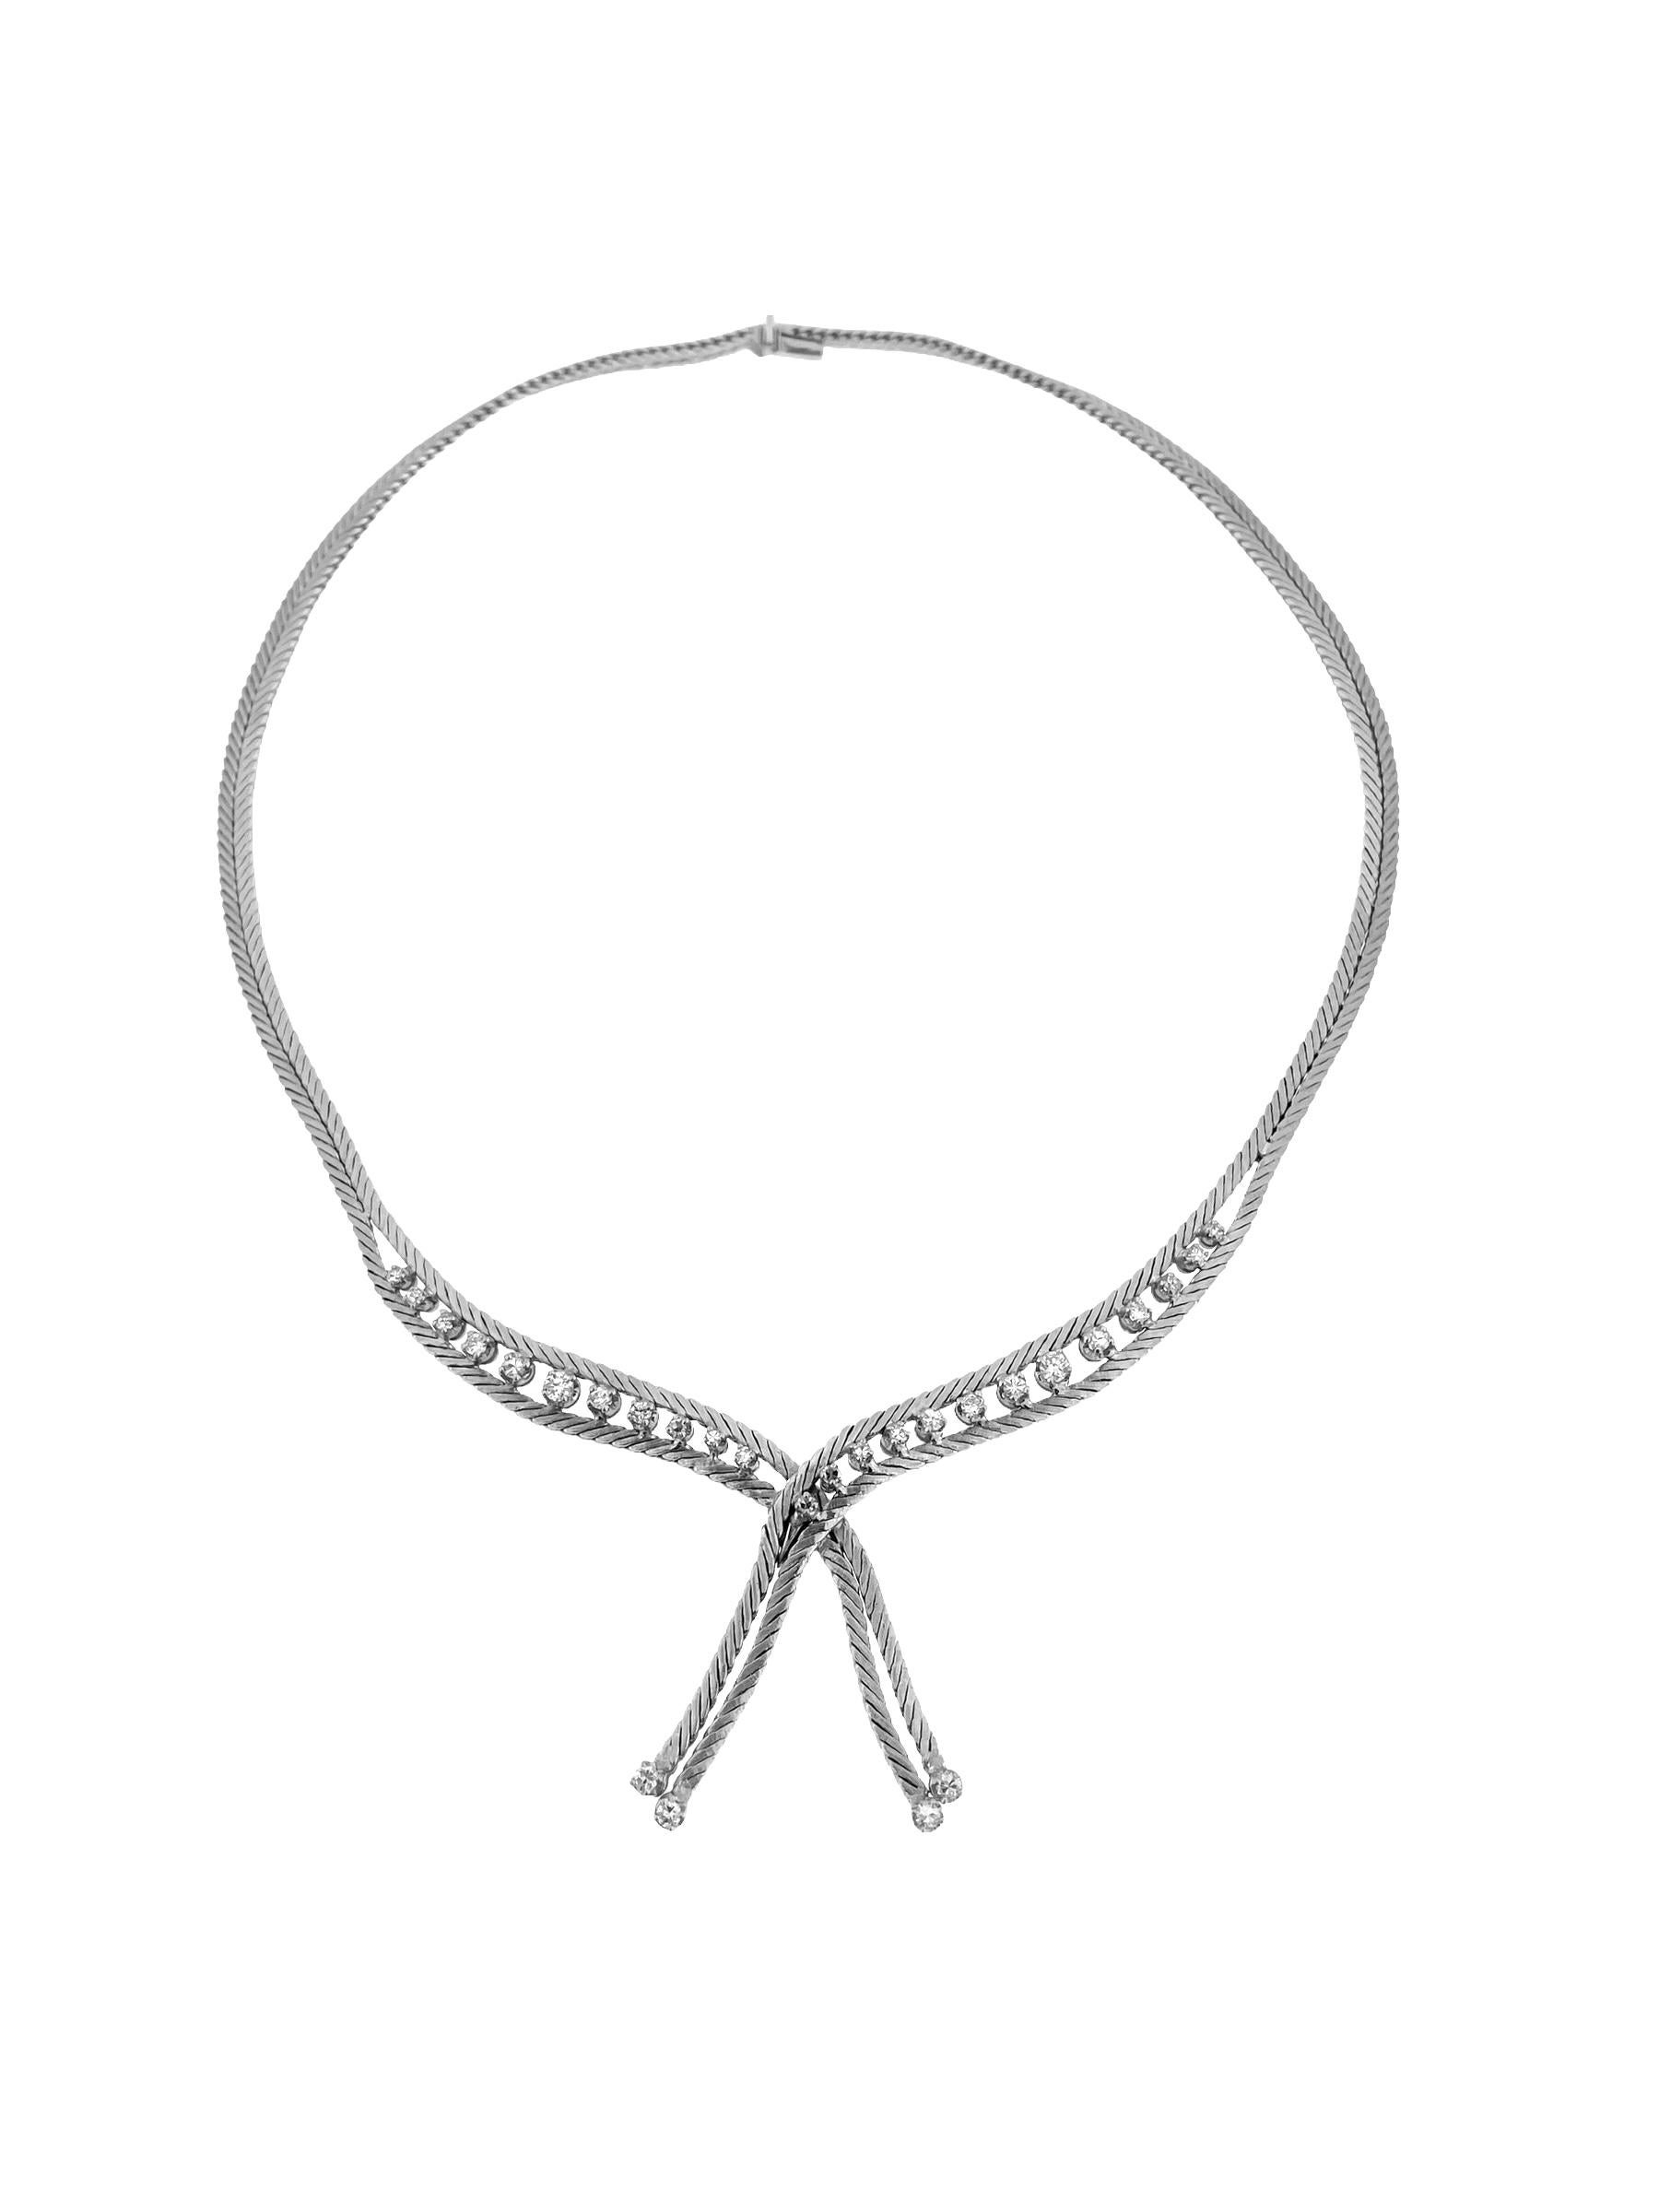 Artisan Mid-Century White Gold Necklace with Diamonds For Sale